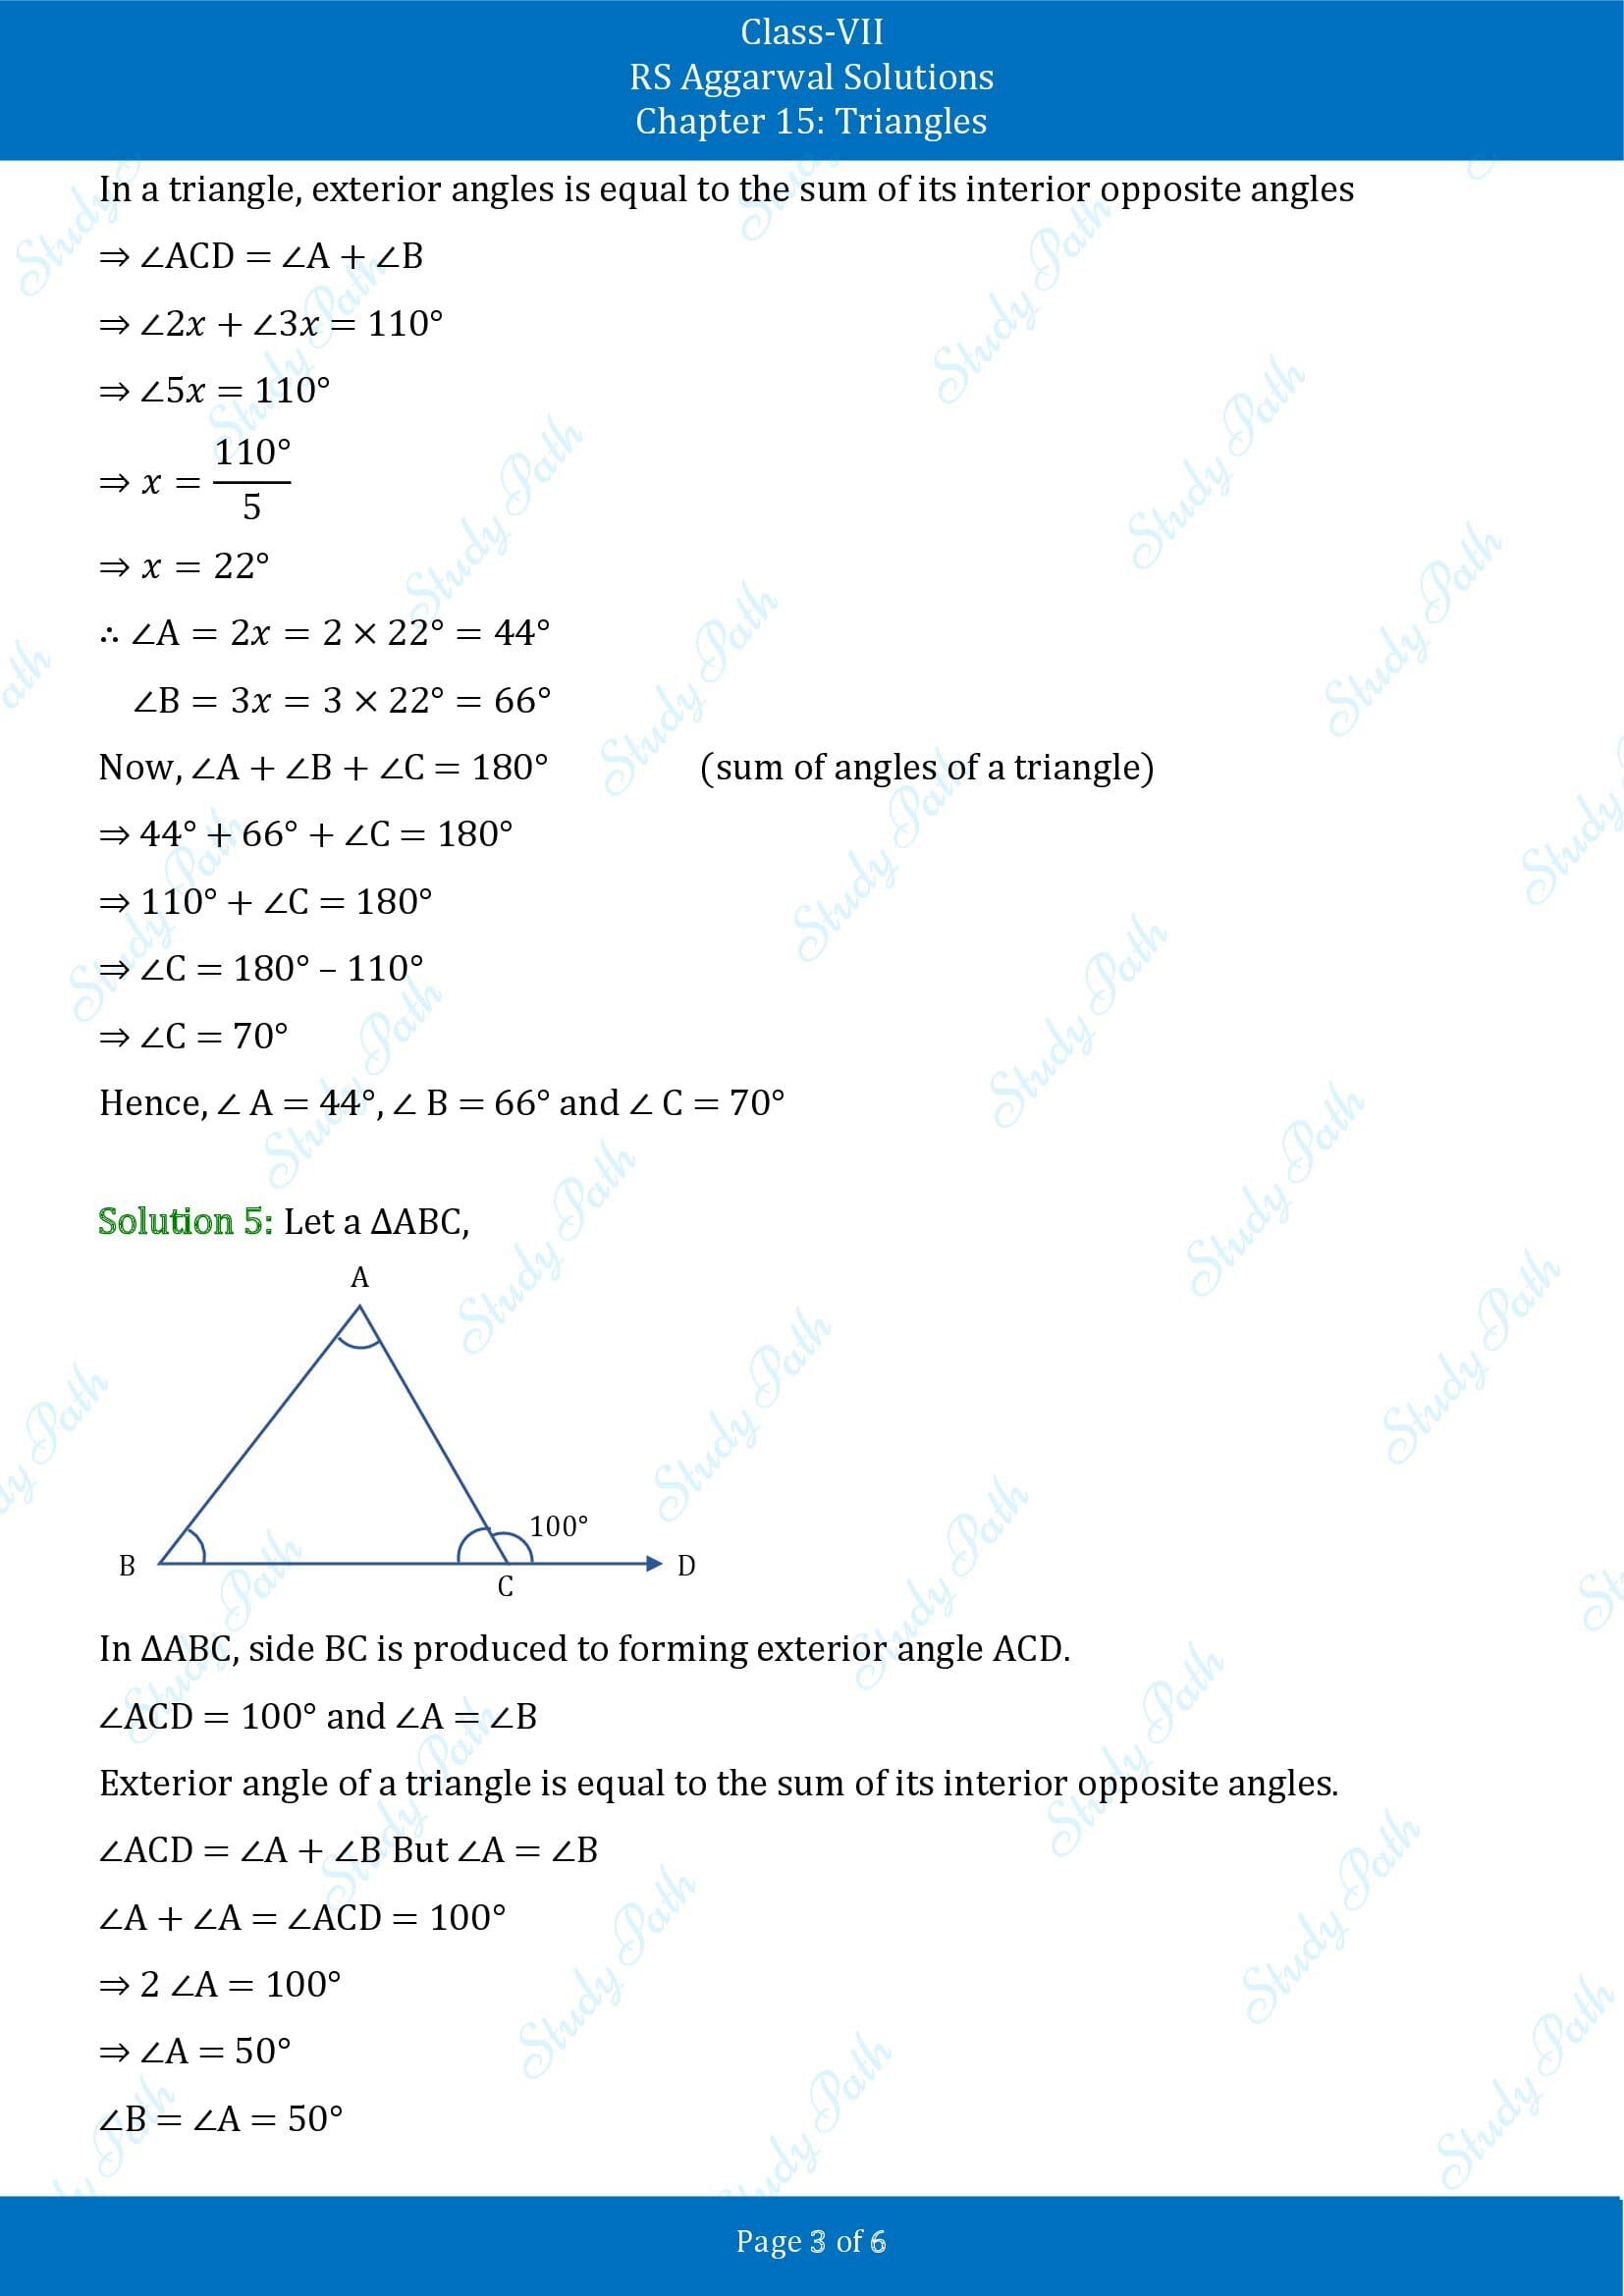 RS Aggarwal Solutions Class 7 Chapter 15 Triangles Exercise 15B 00003